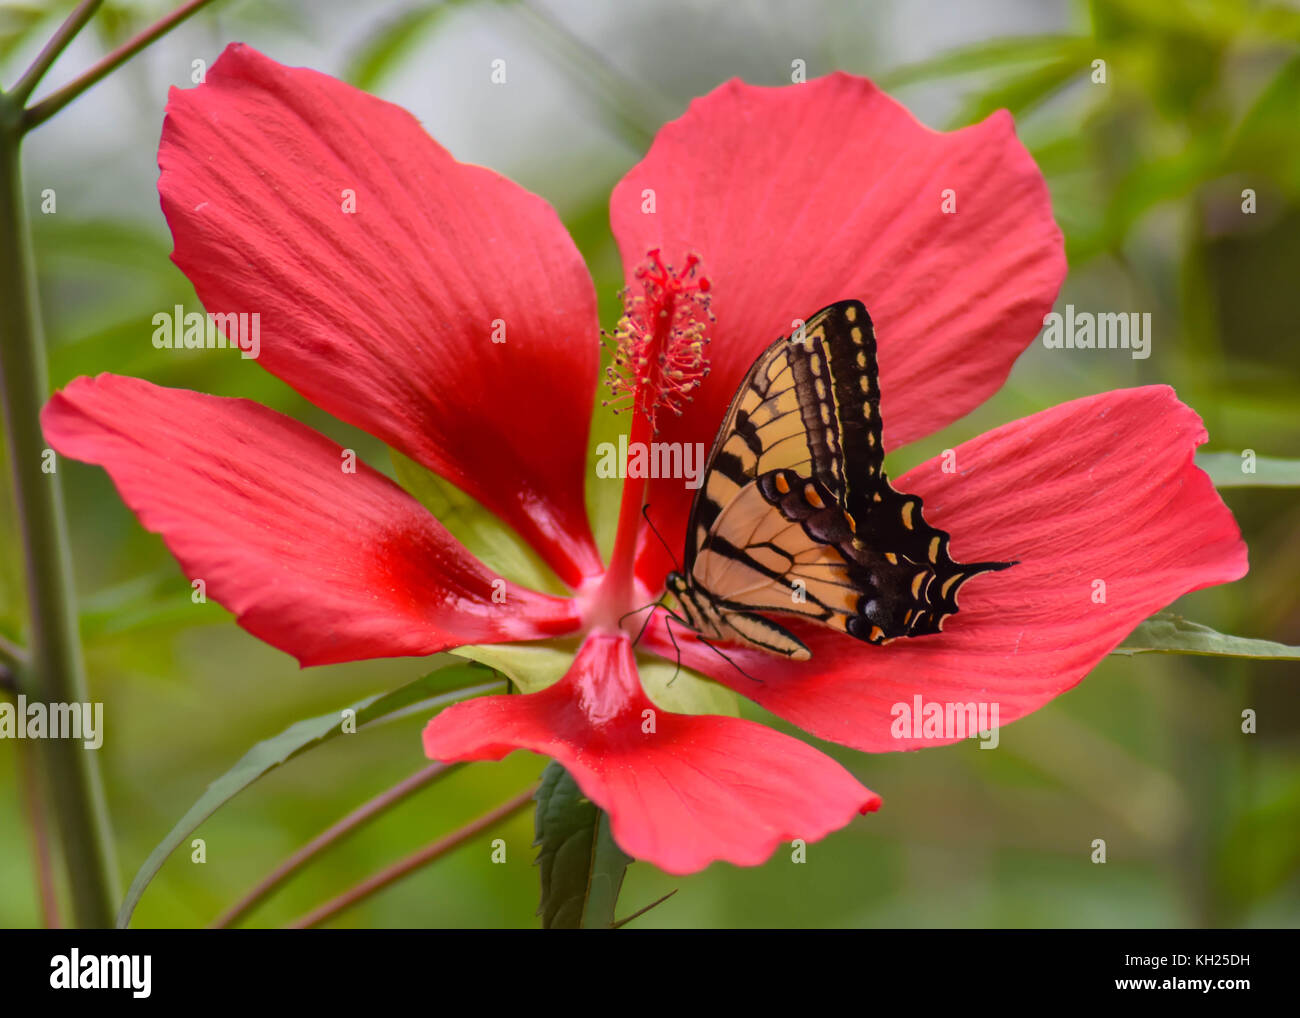 An Eastern Tiger Swallowtail on a Scarlet Hibiscus Stock Photo